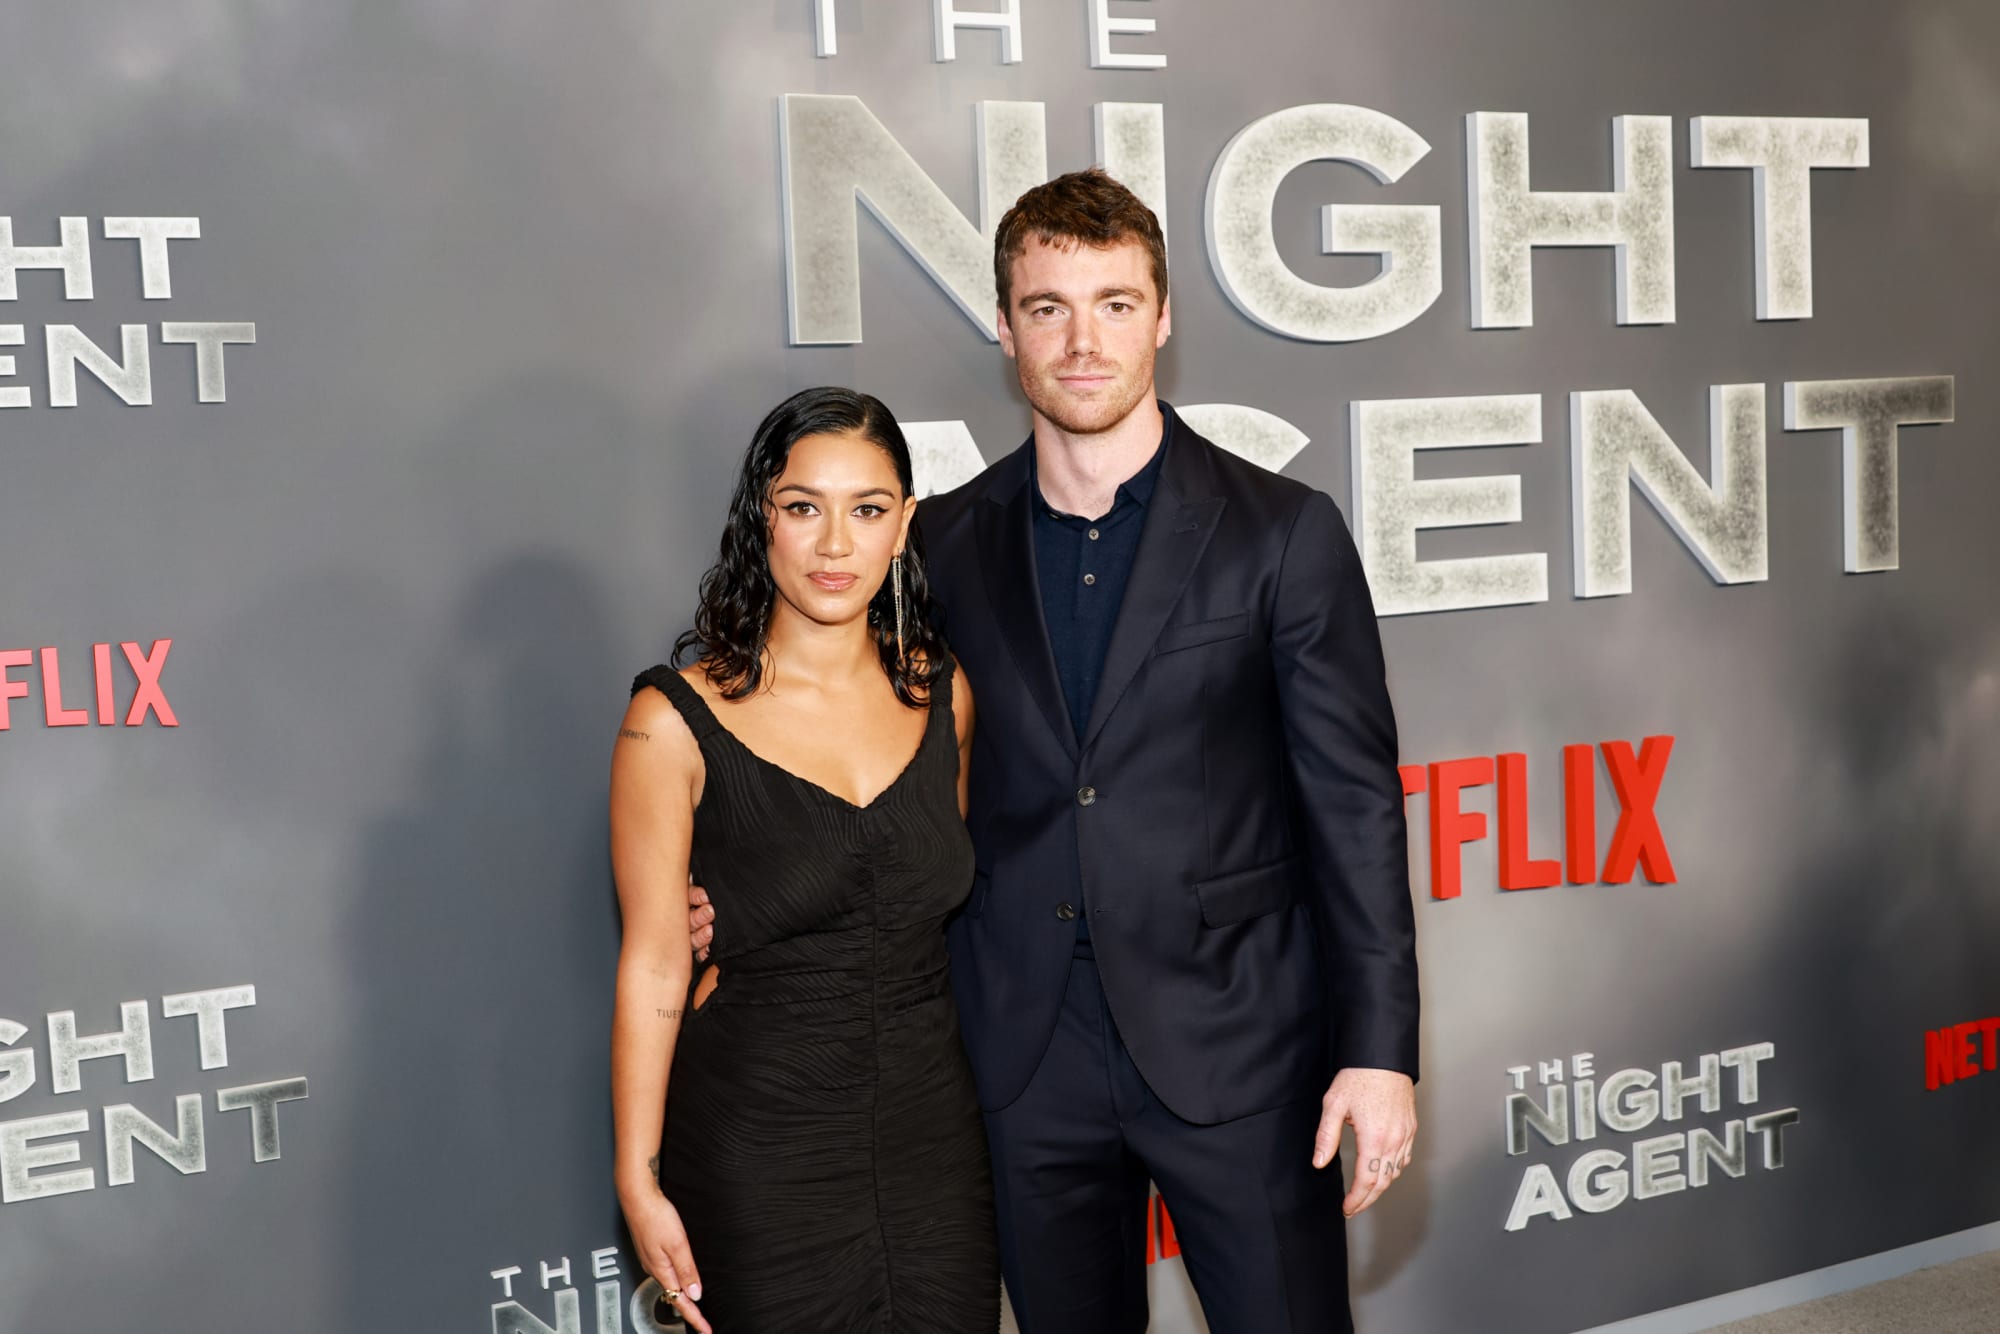 The Night Agent renewed for season 2 following successful debut